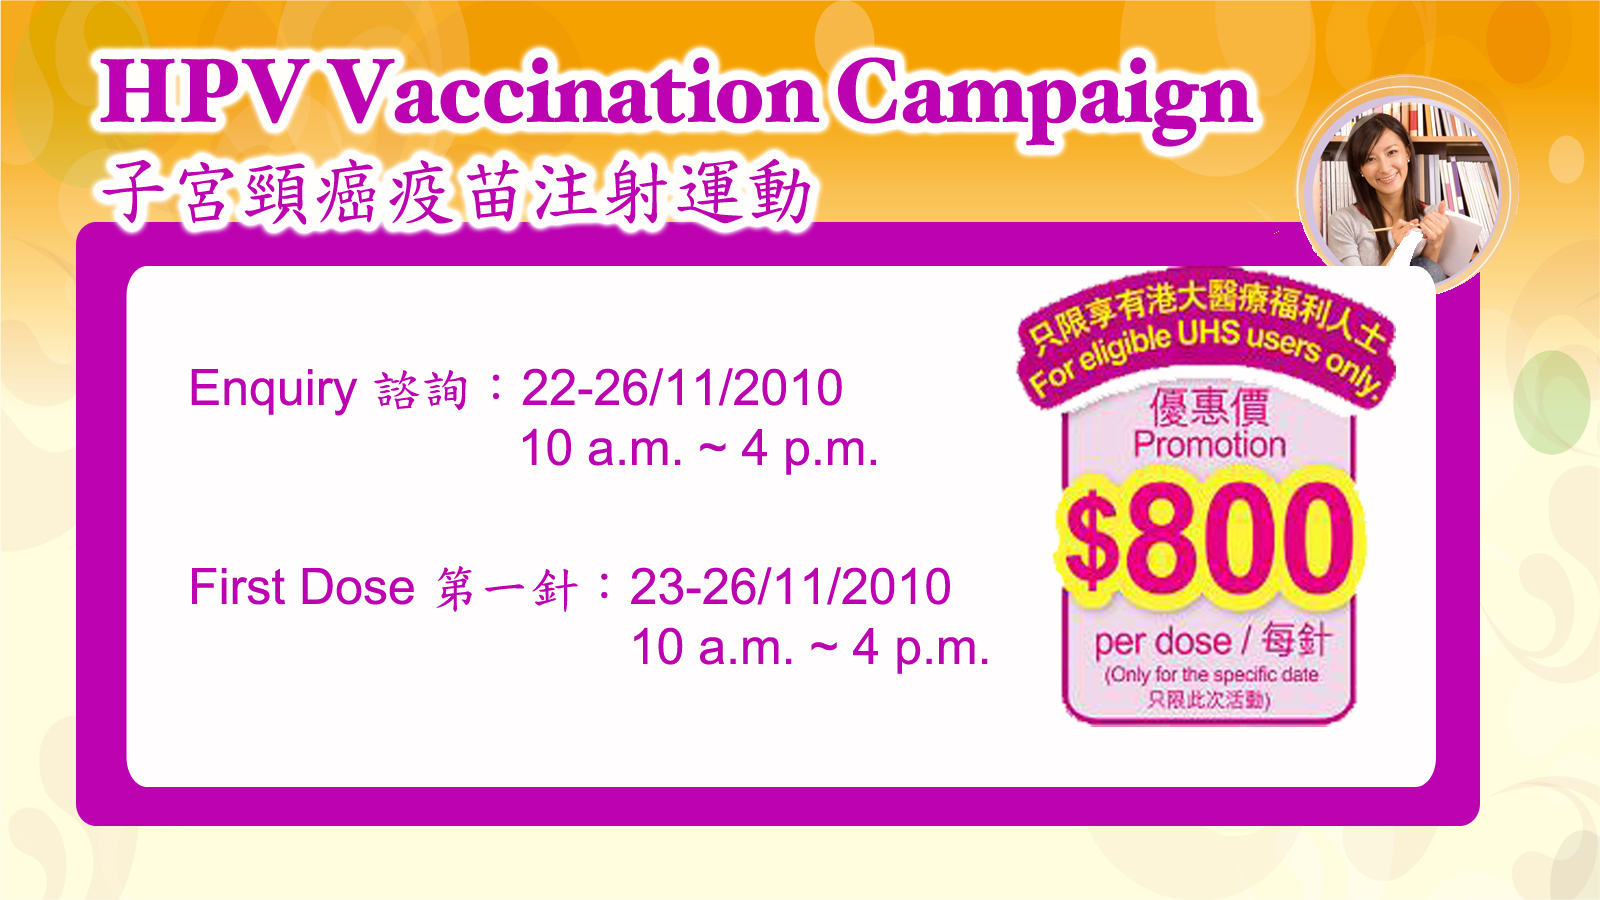 Cancer Prevention, Smoking Awareness and HPV Vaccination Campaign